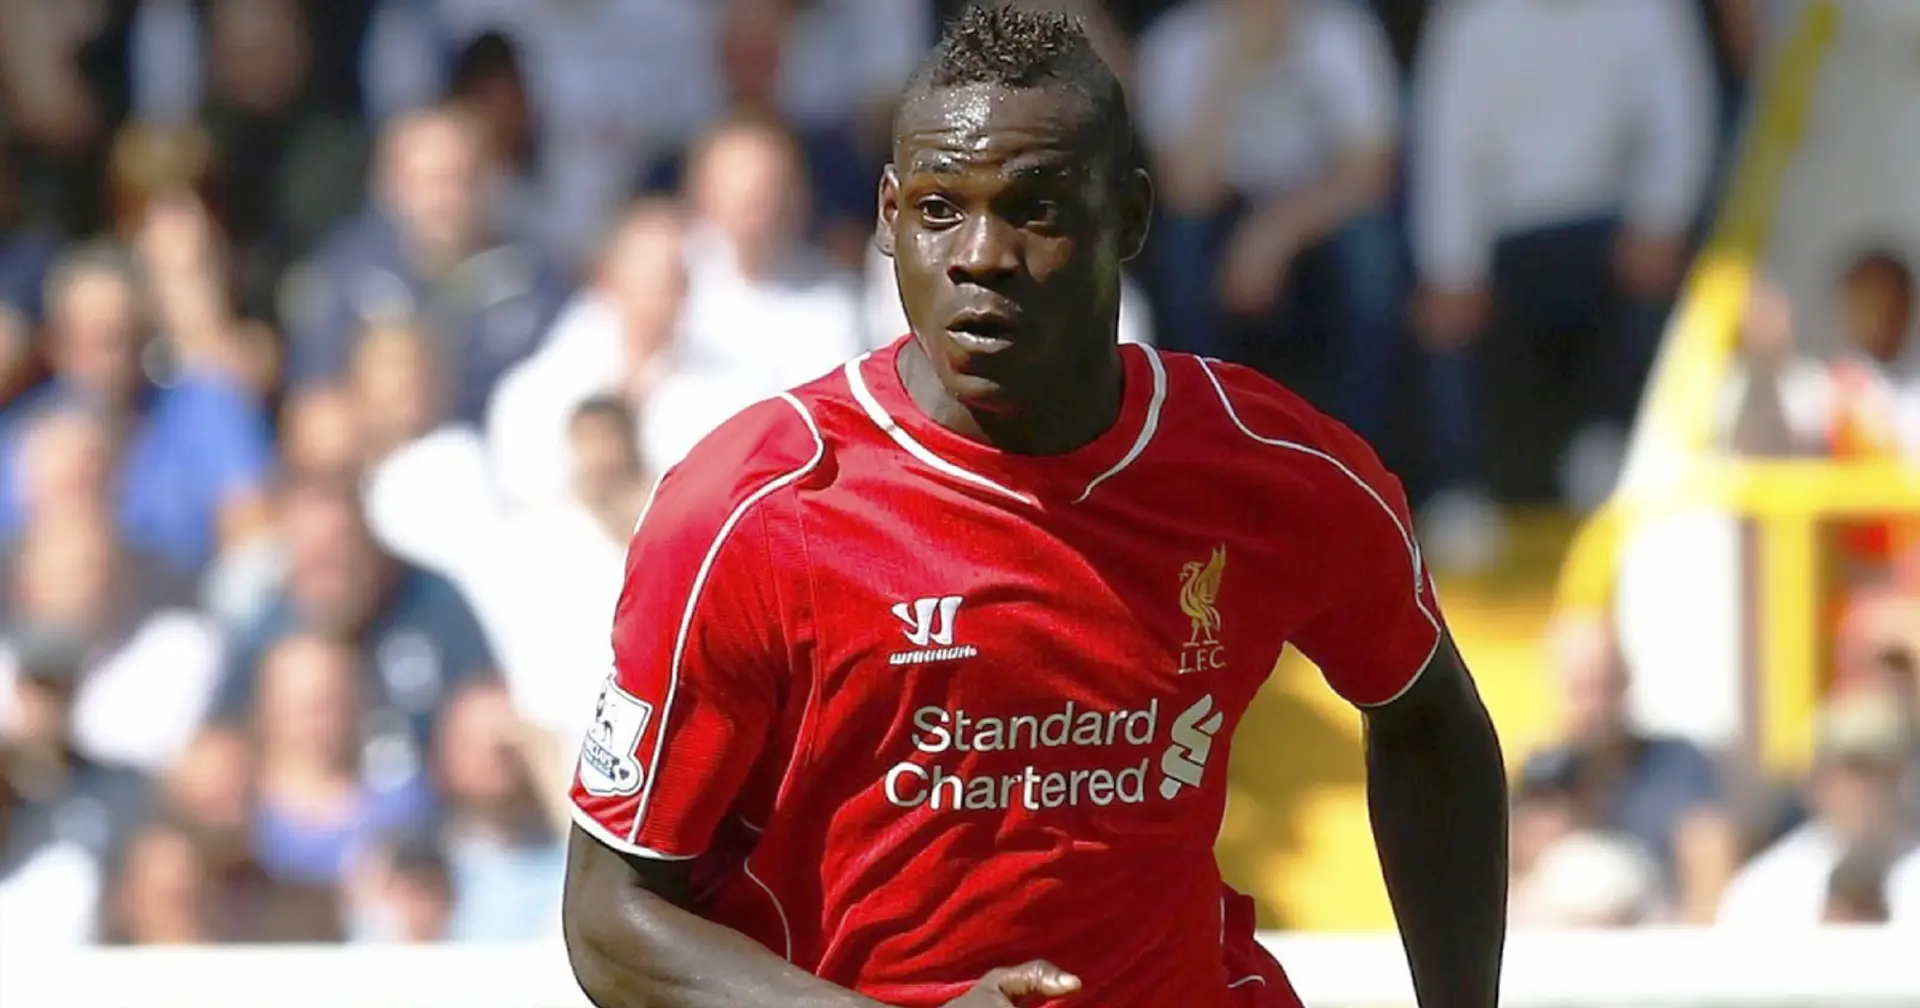 'I only have good memories of the Premier League': Former Red Mario Balotelli says he has no regrets over time in England